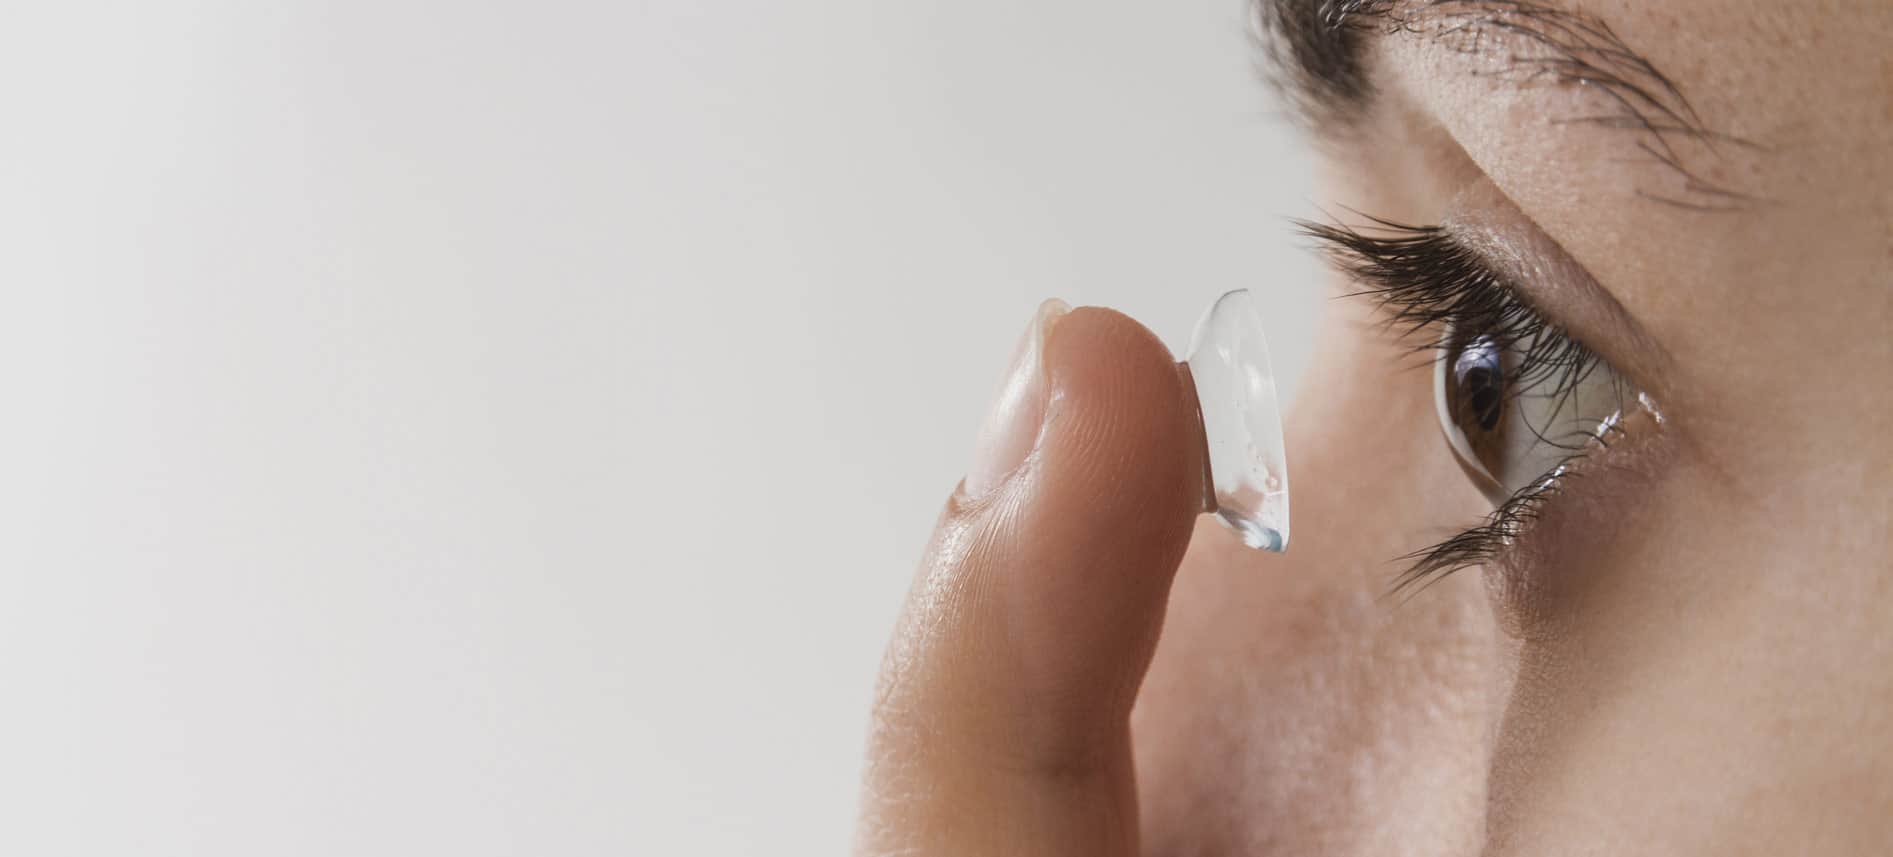 First Optic Contact Lenses Hero Image